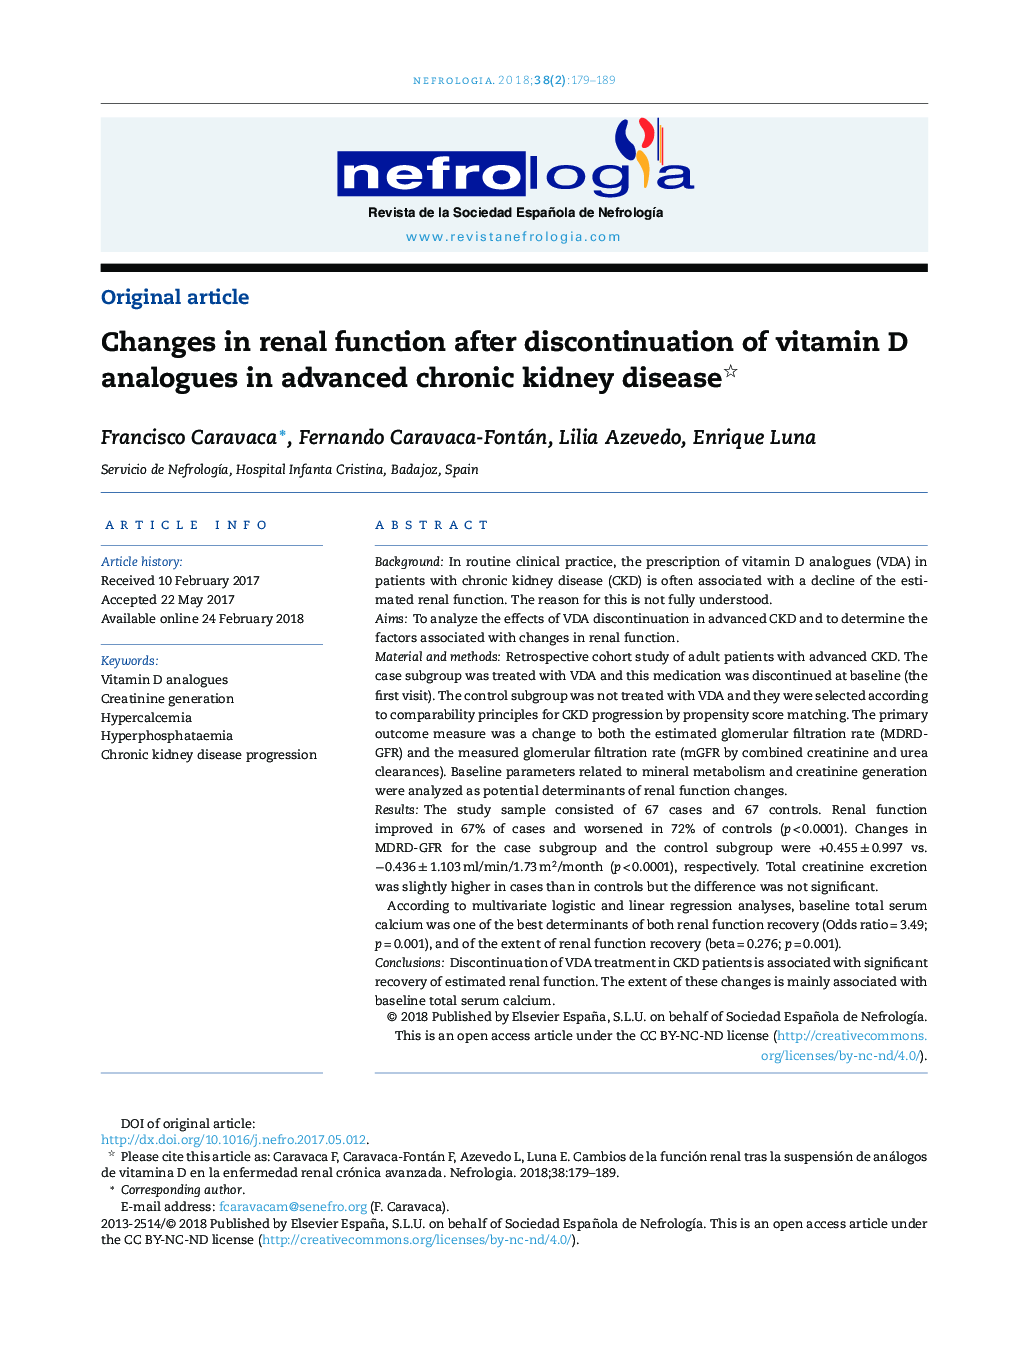 Changes in renal function after discontinuation of vitamin D analogues in advanced chronic kidney disease